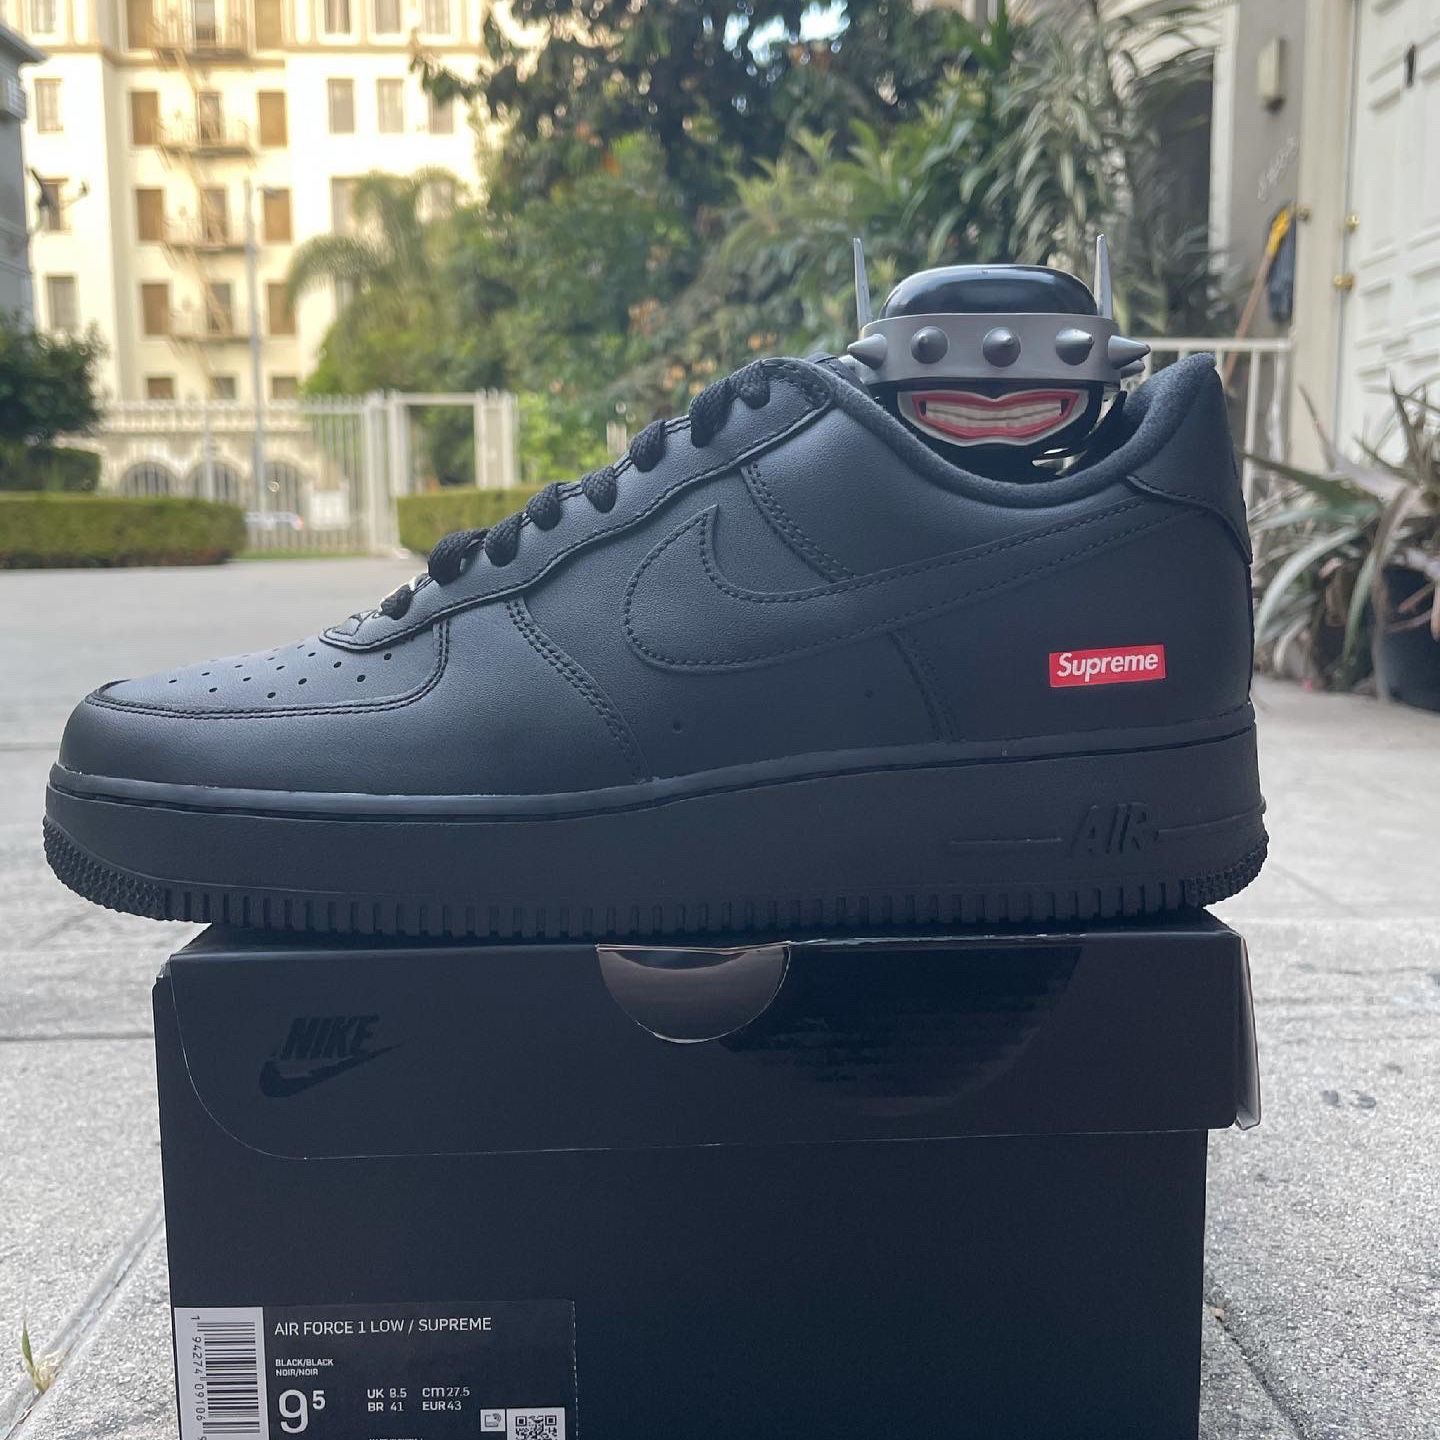 Supreme X Nike Air Force 1 Size 9.5 for Sale in Los Angeles, CA